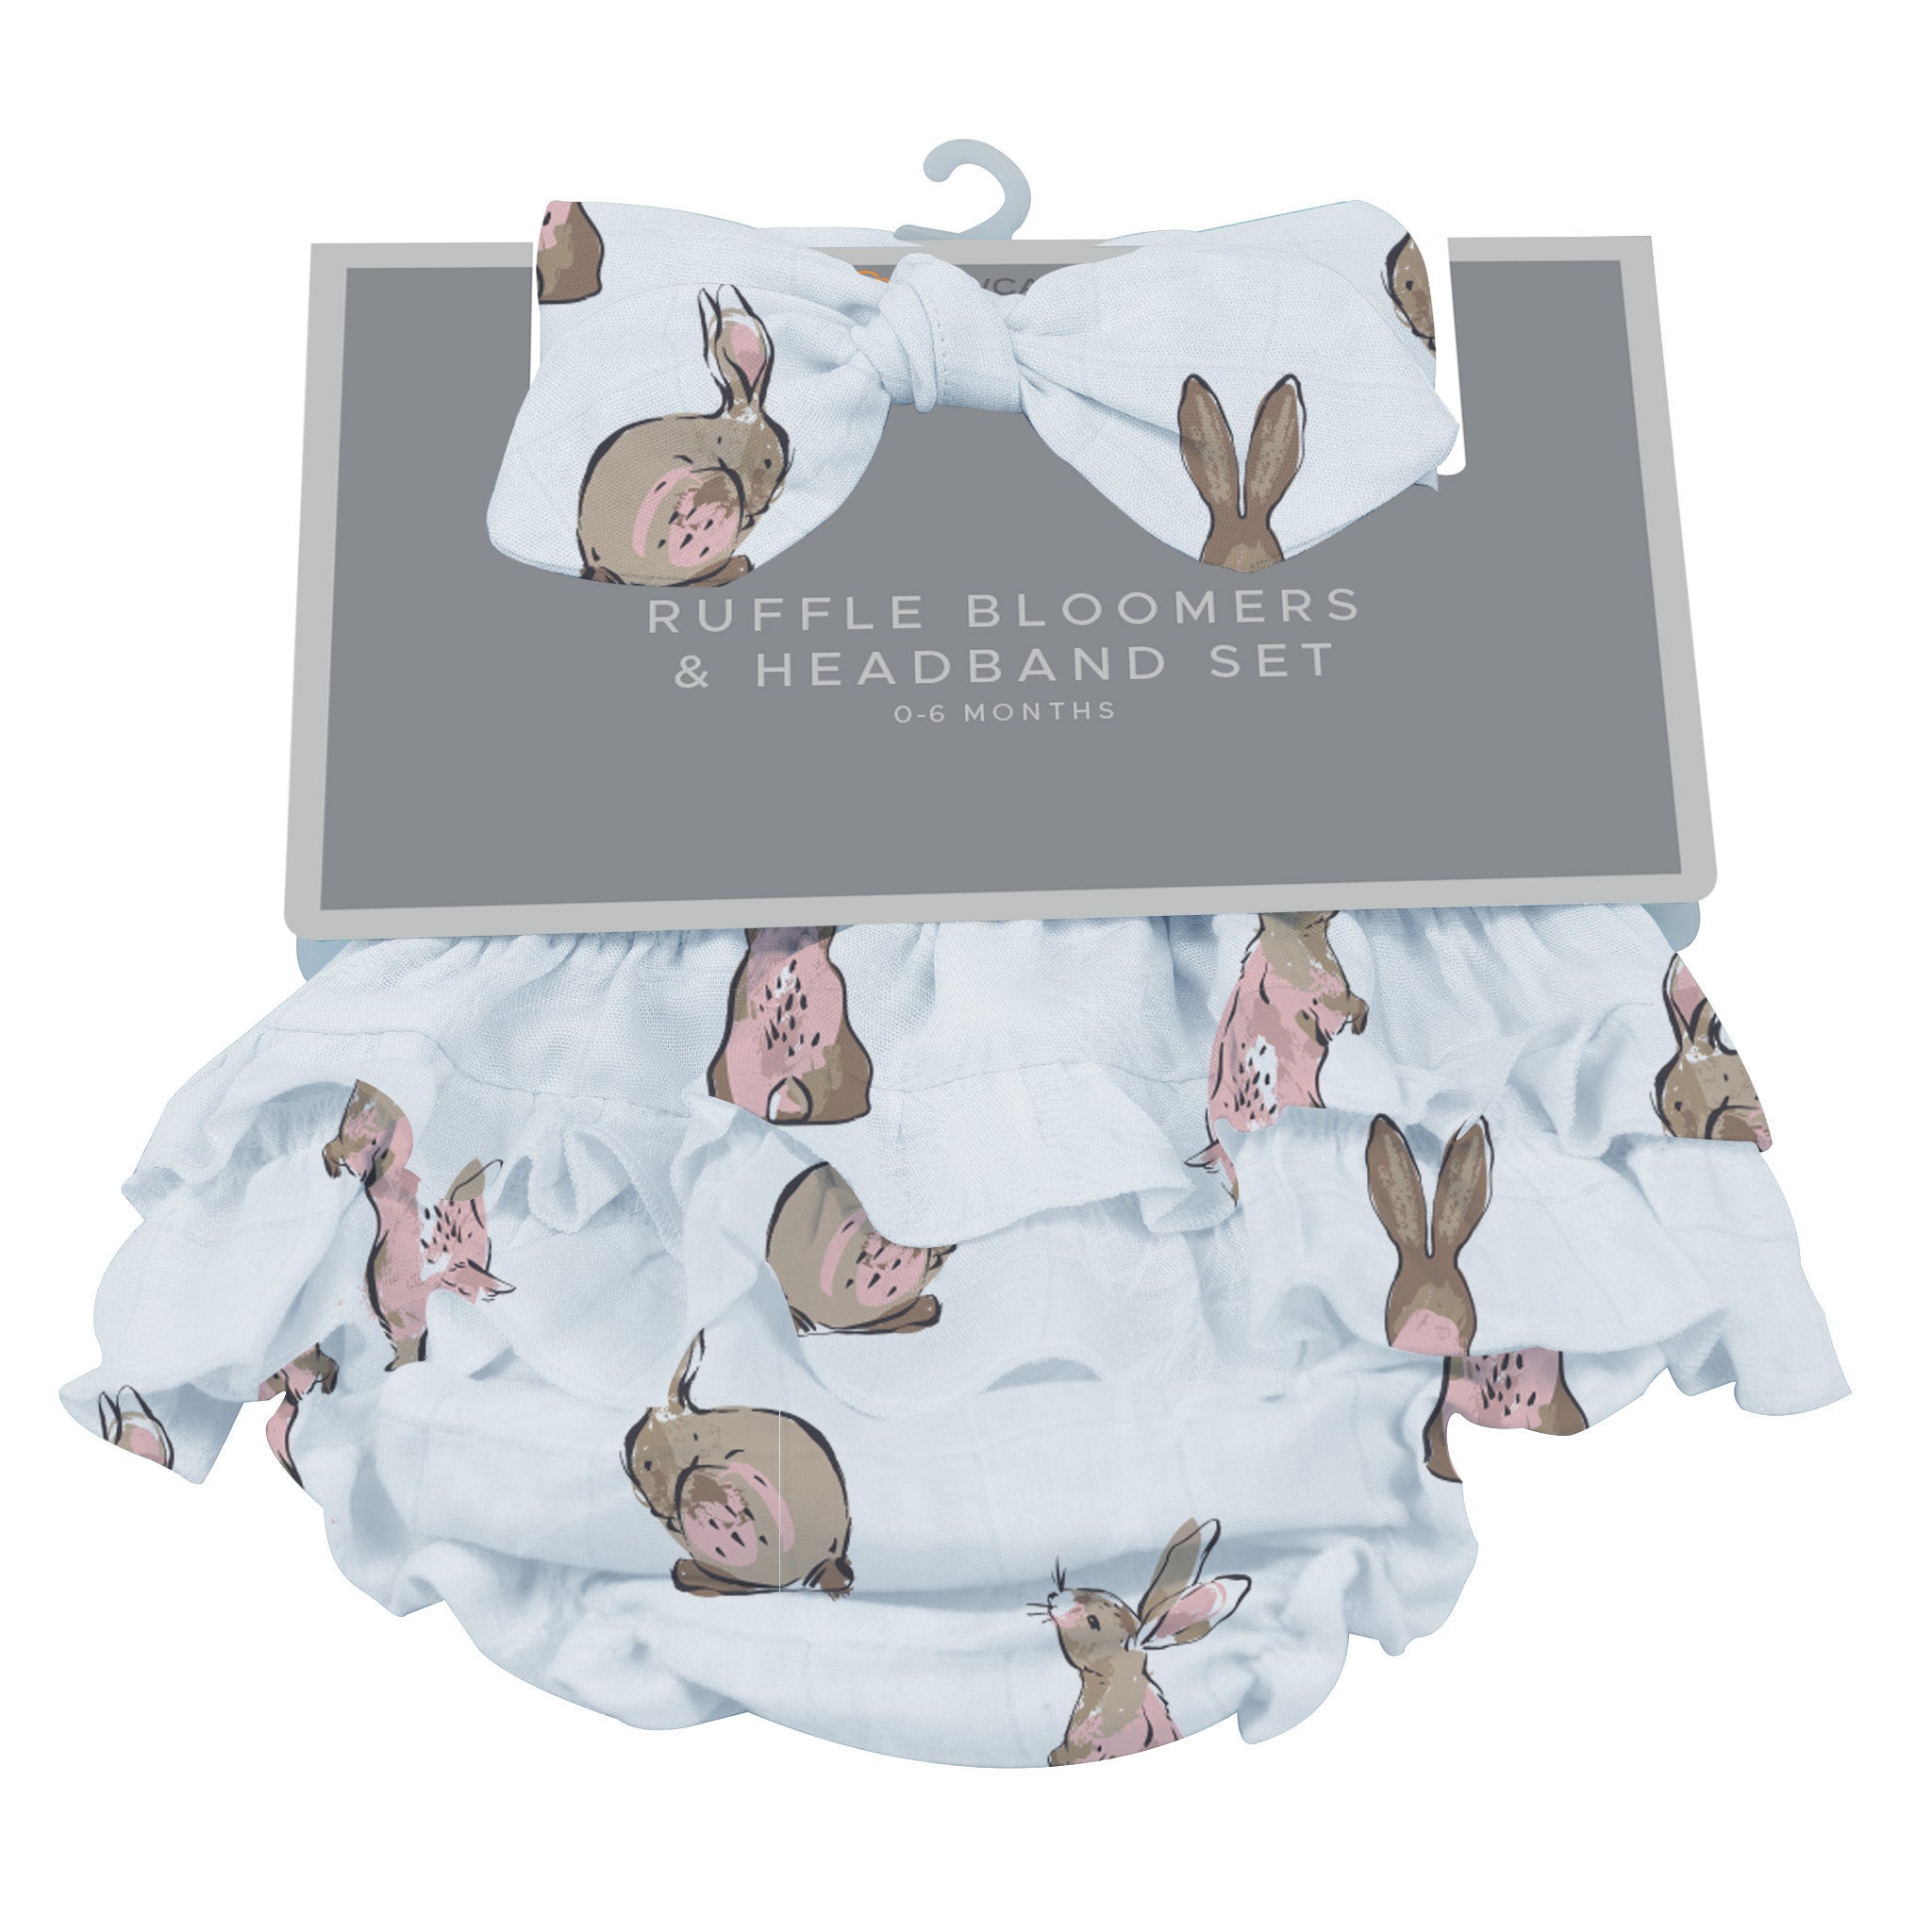 Baby bloomers and headband set with bunnies